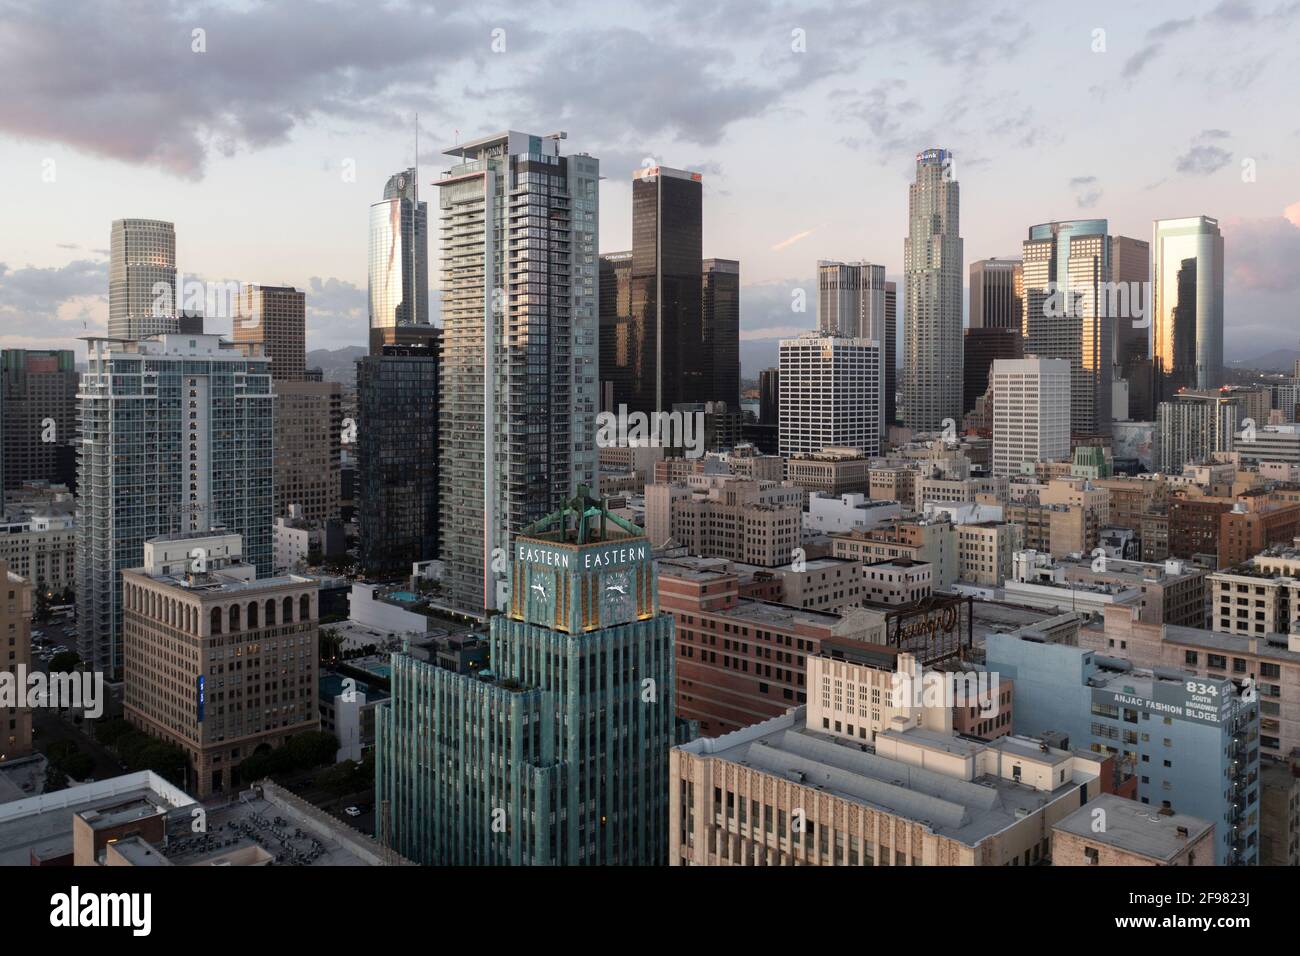 Towers of downtown urban Los Angeles with landmark Eastern Building Stock Photo